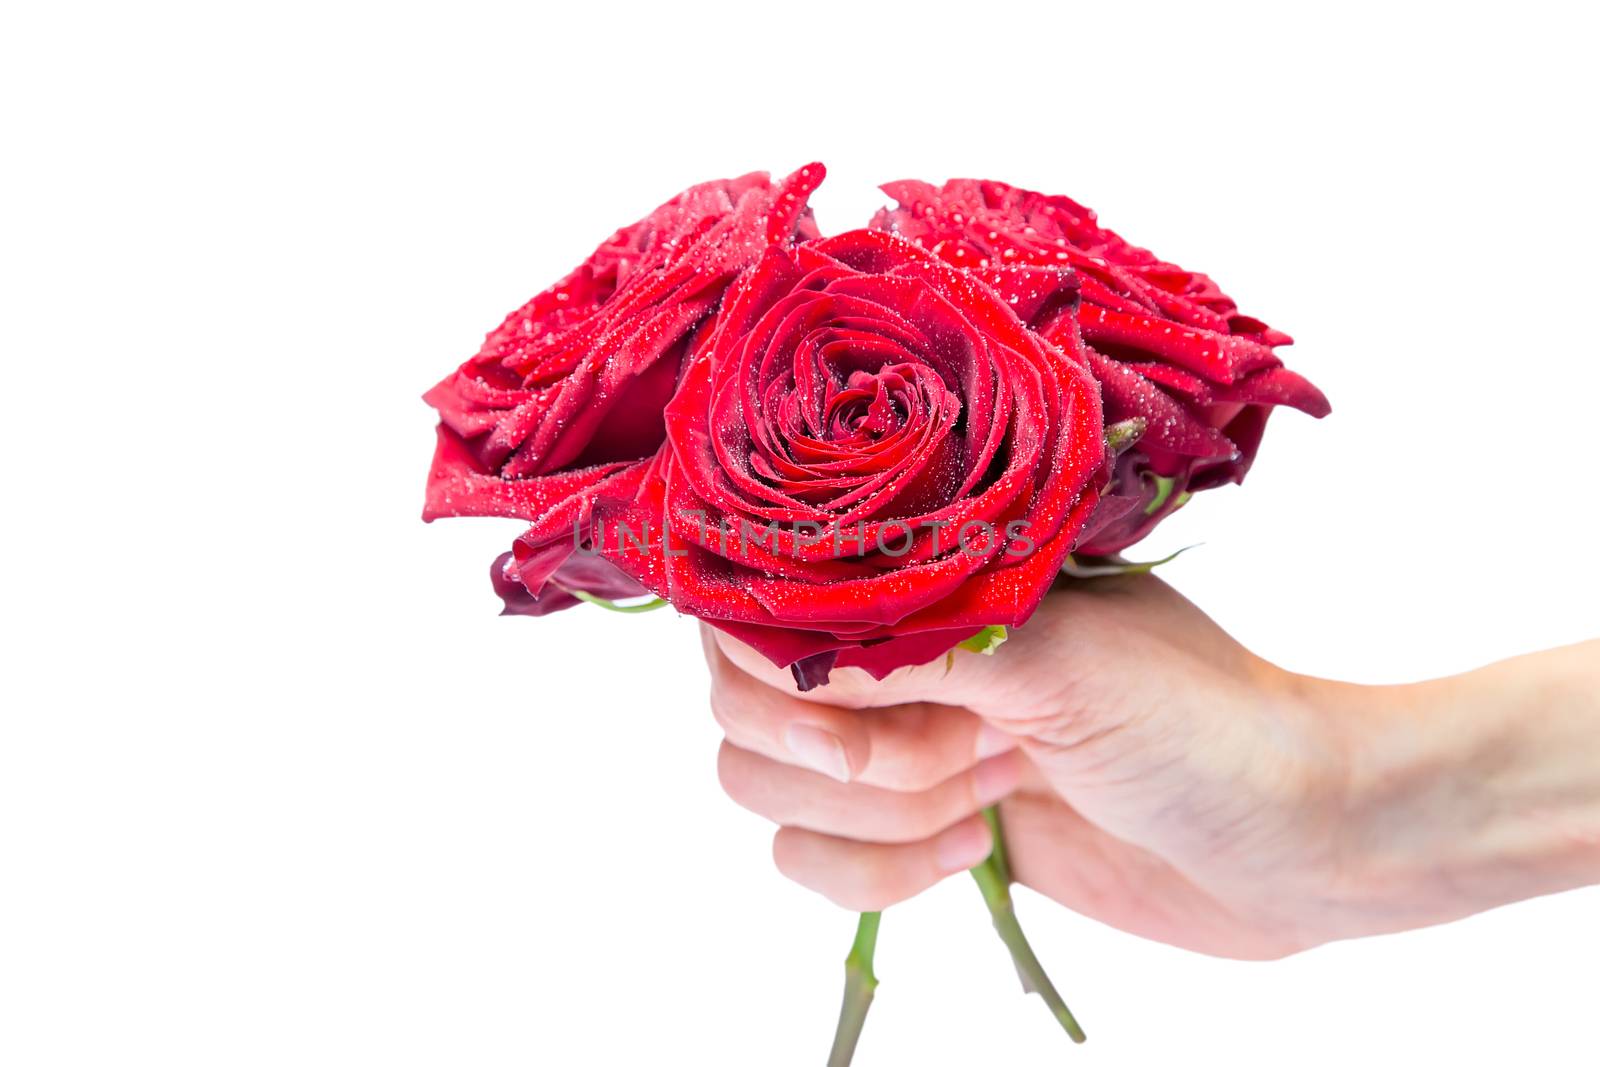 Hand holding red roses with water drops by BenSchonewille